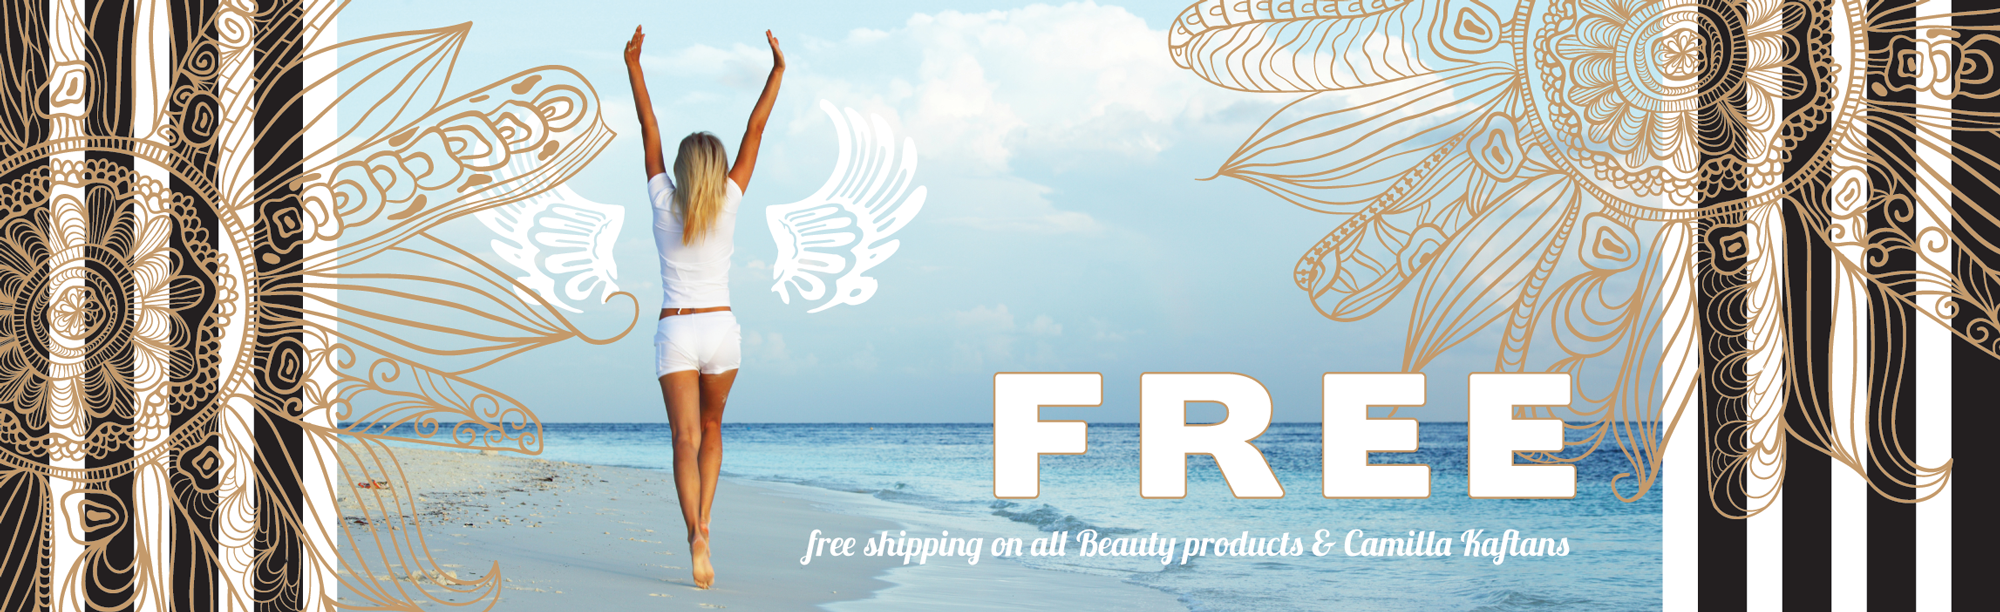 shop-banners_free_shipping.png